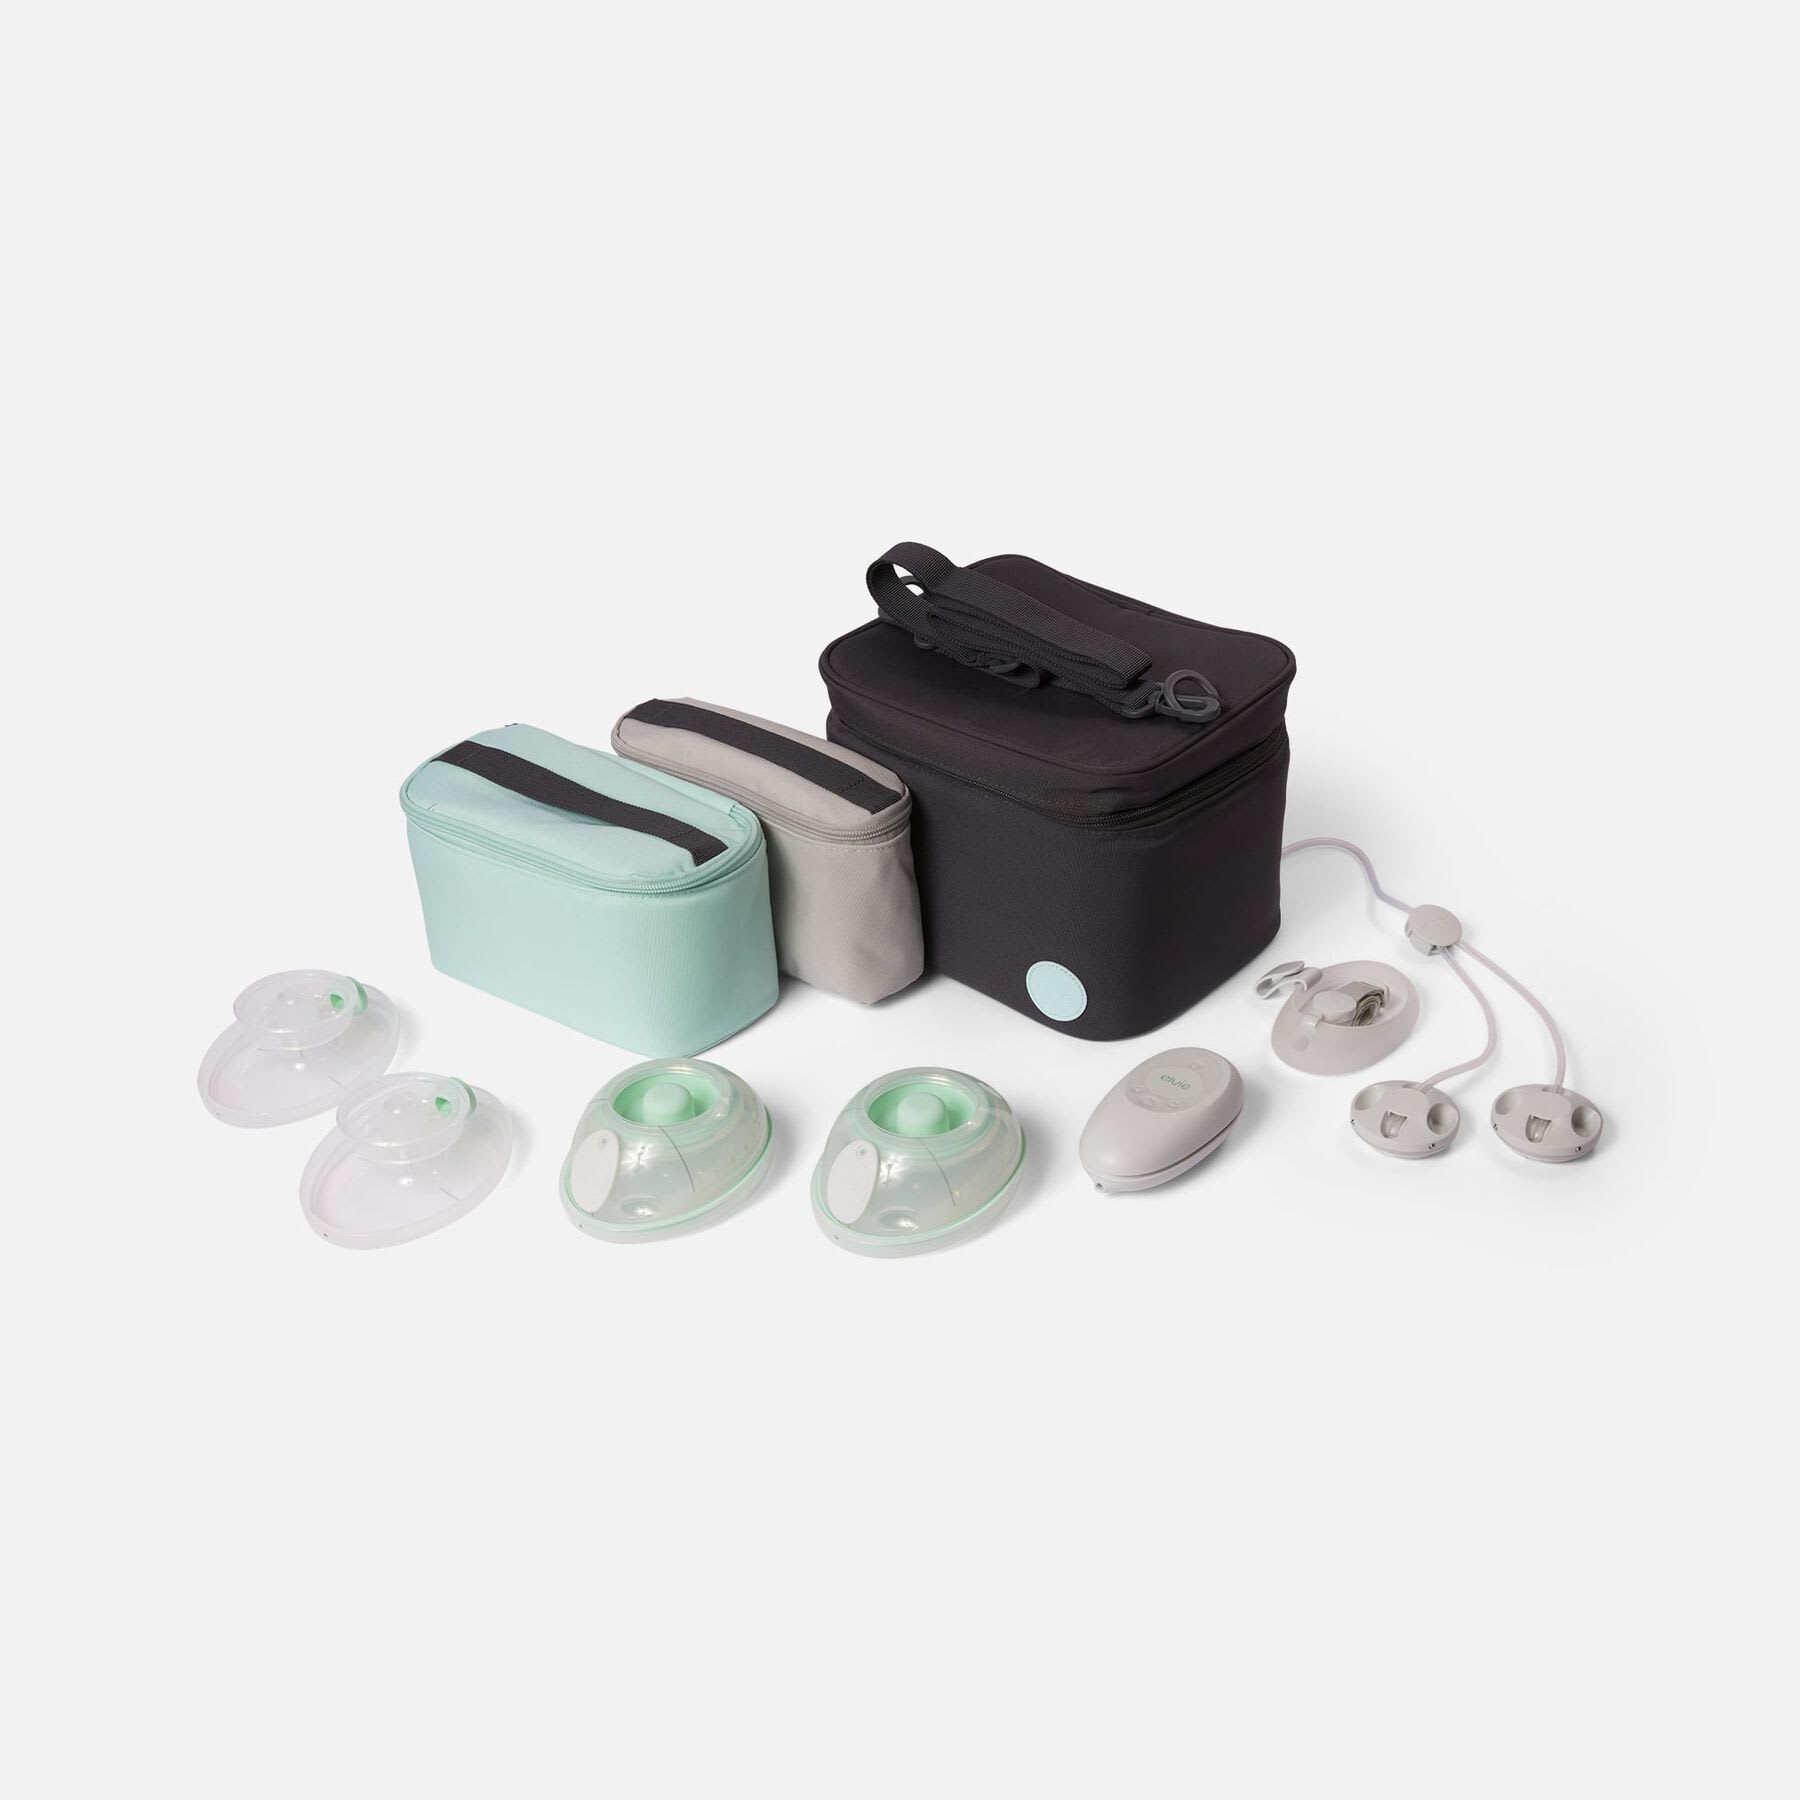 Elvie Stride is a hospital-grade breast pump that can be worn